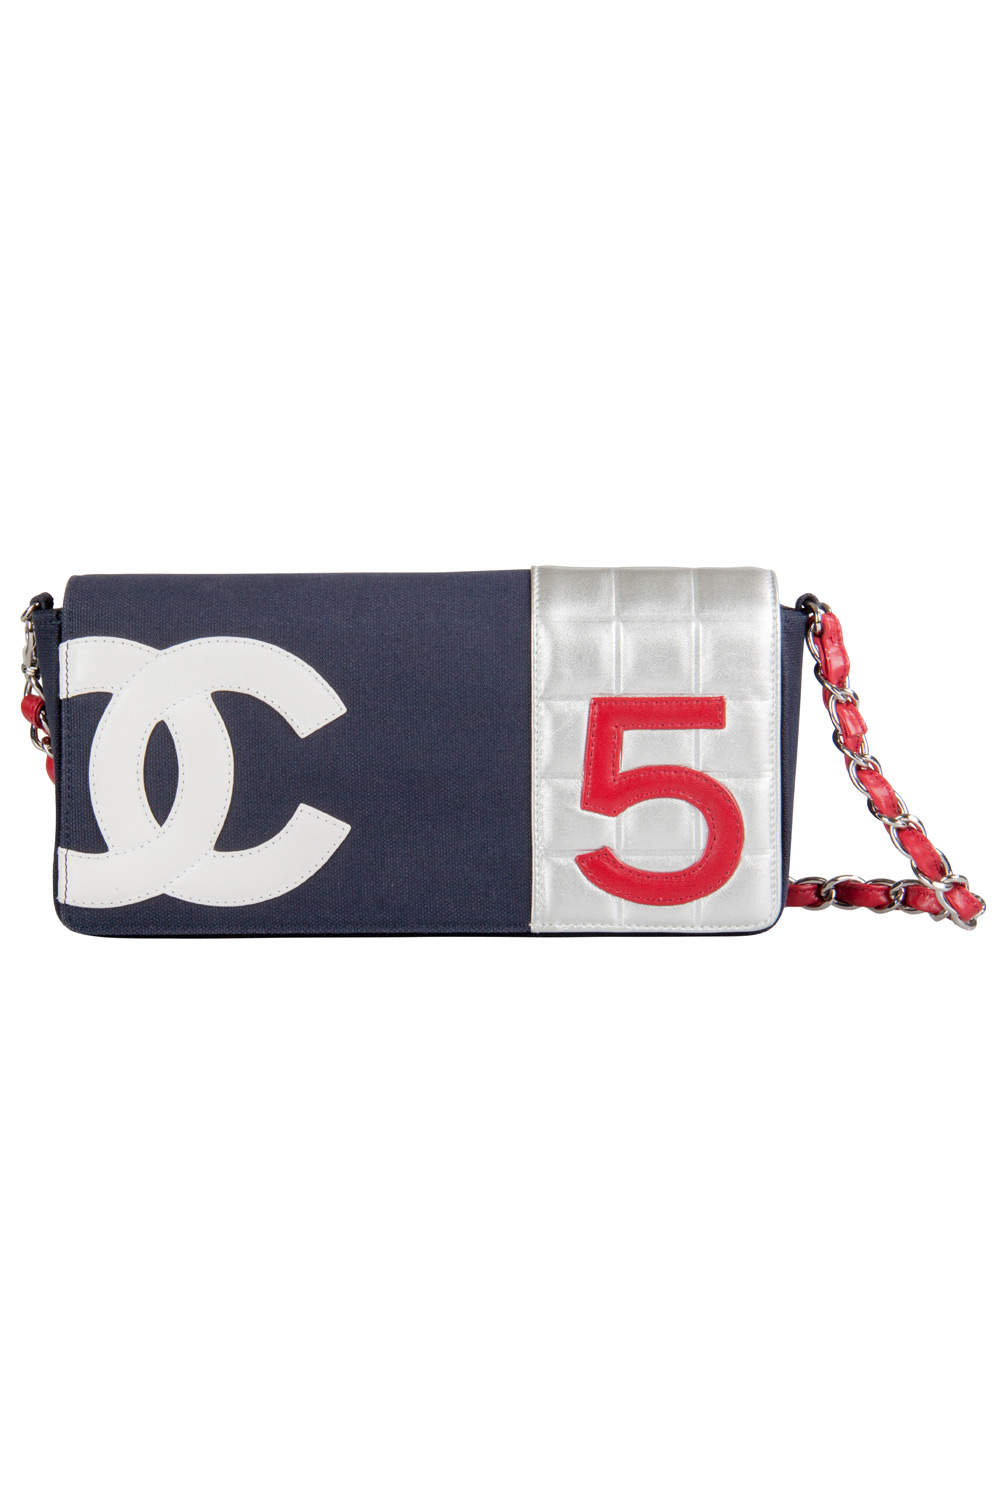 Chanel Multicolor Canvas and Leather No. 5 Flap Bag